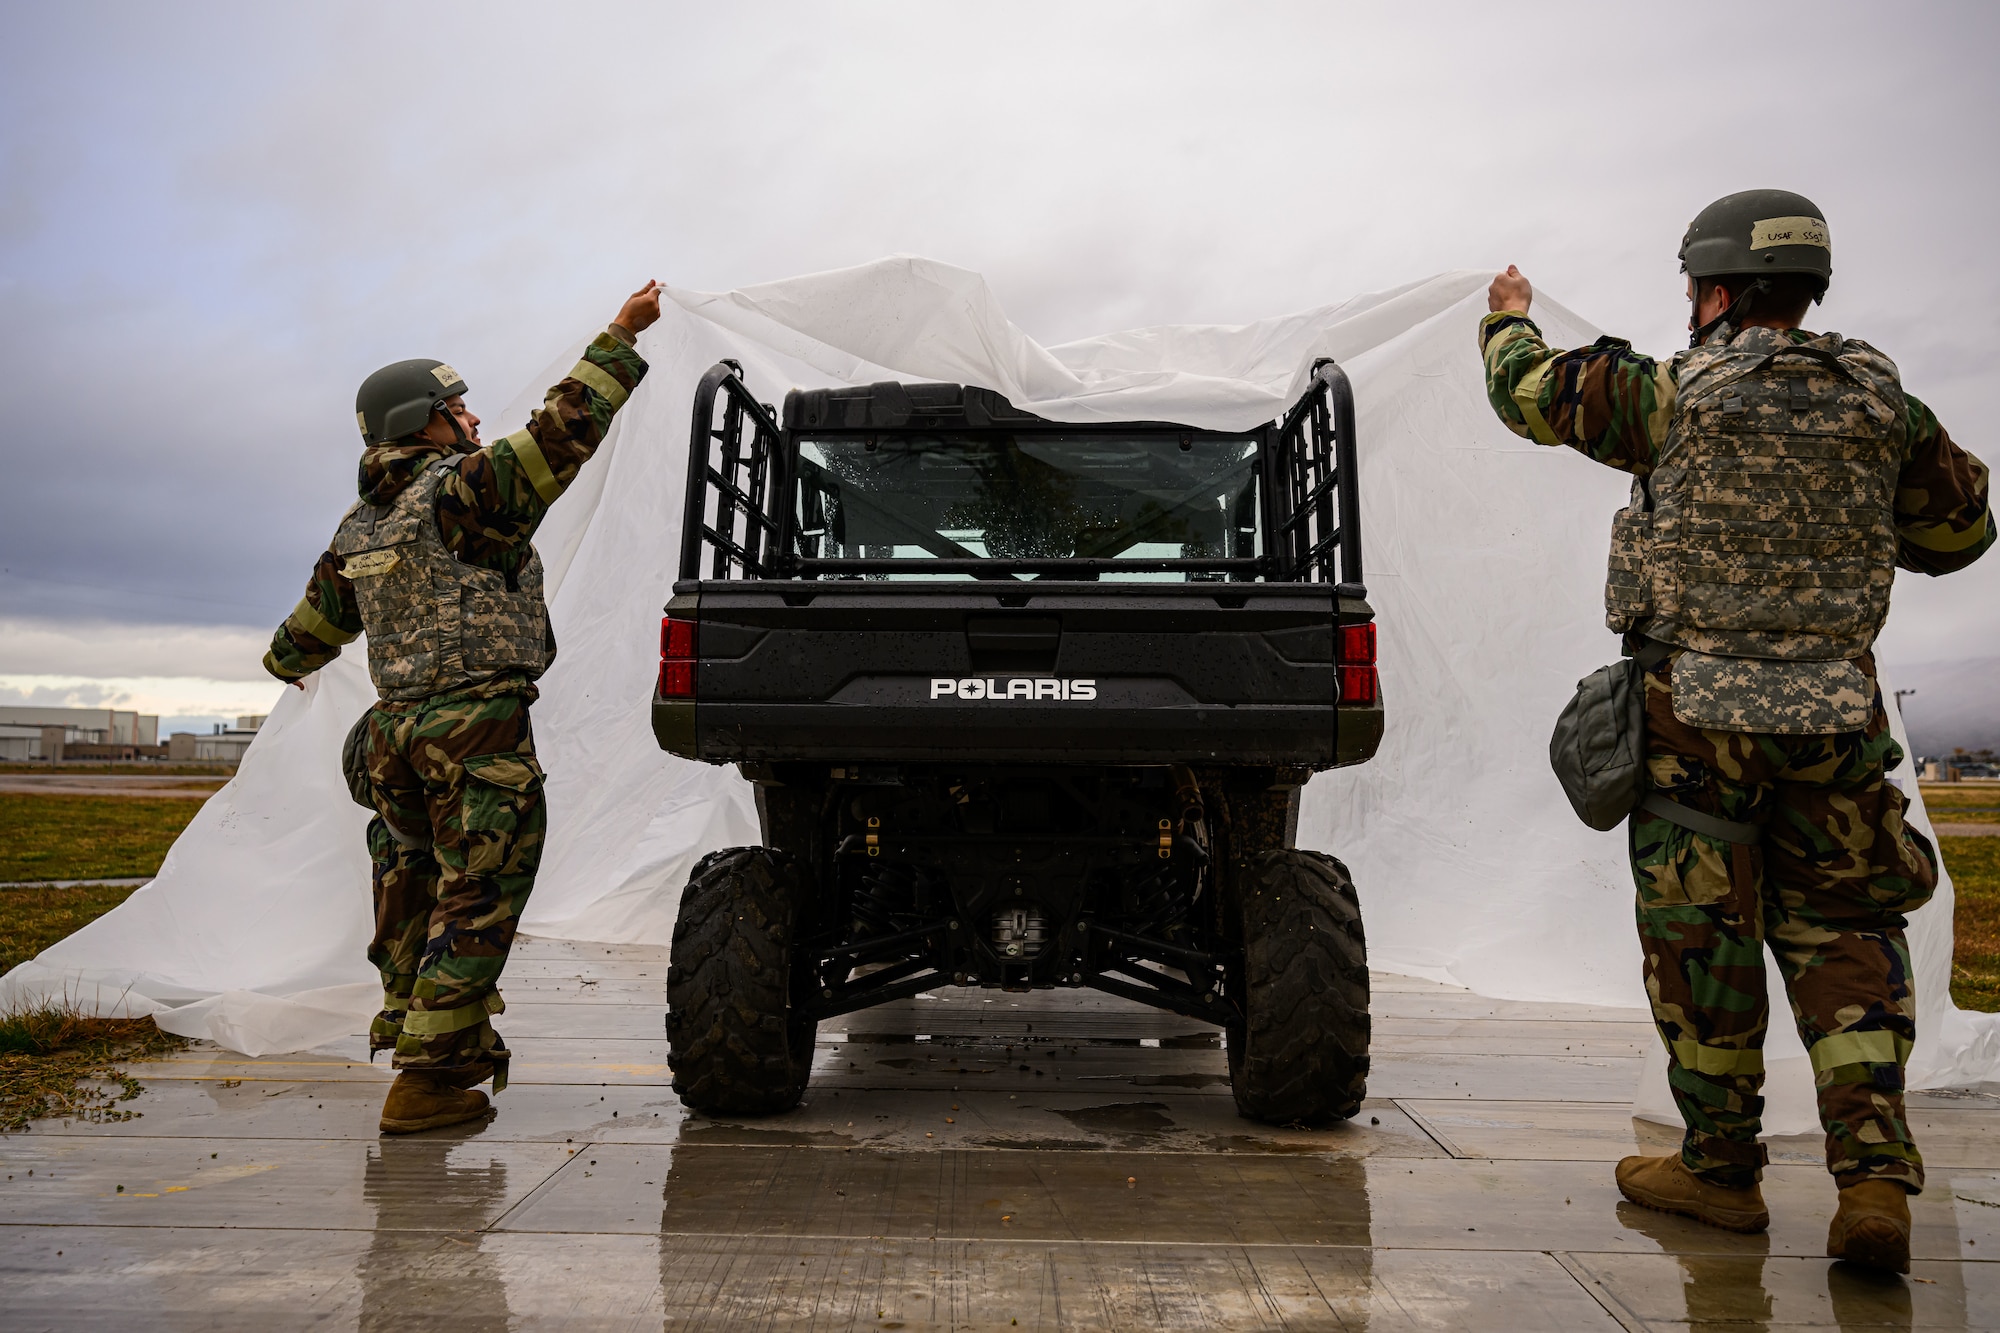 Two Airmen in chem gear cover a utility vehicle with opaque plastic